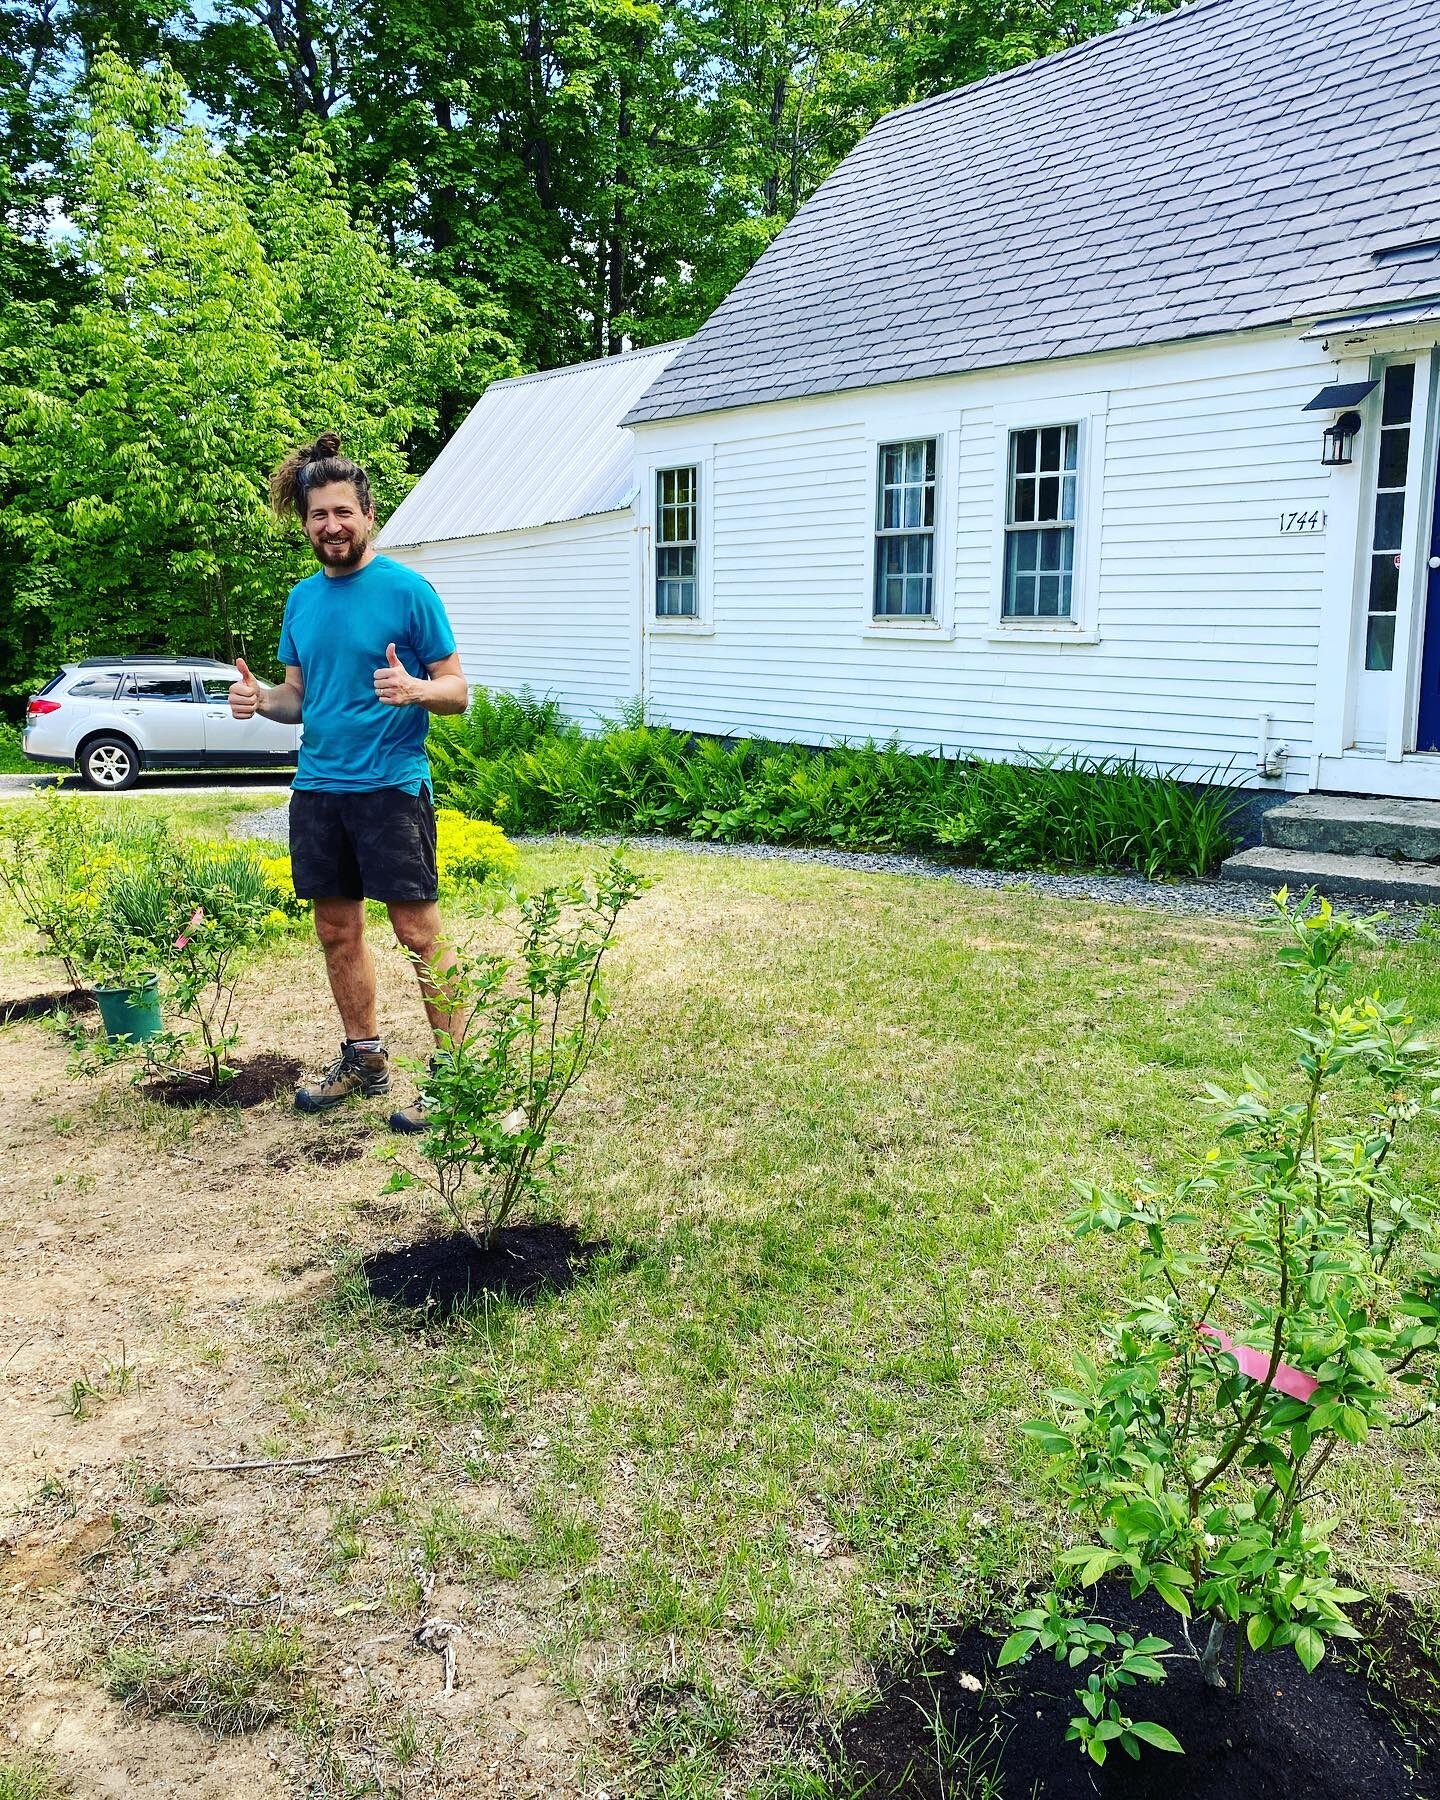 Blueberry bushes in the front yard! Scroll to see all the new plants growing in the back yard gardens! Loving this Maine life with my wife @madelaineje 
.
#homesteadish #maineliving #grateful